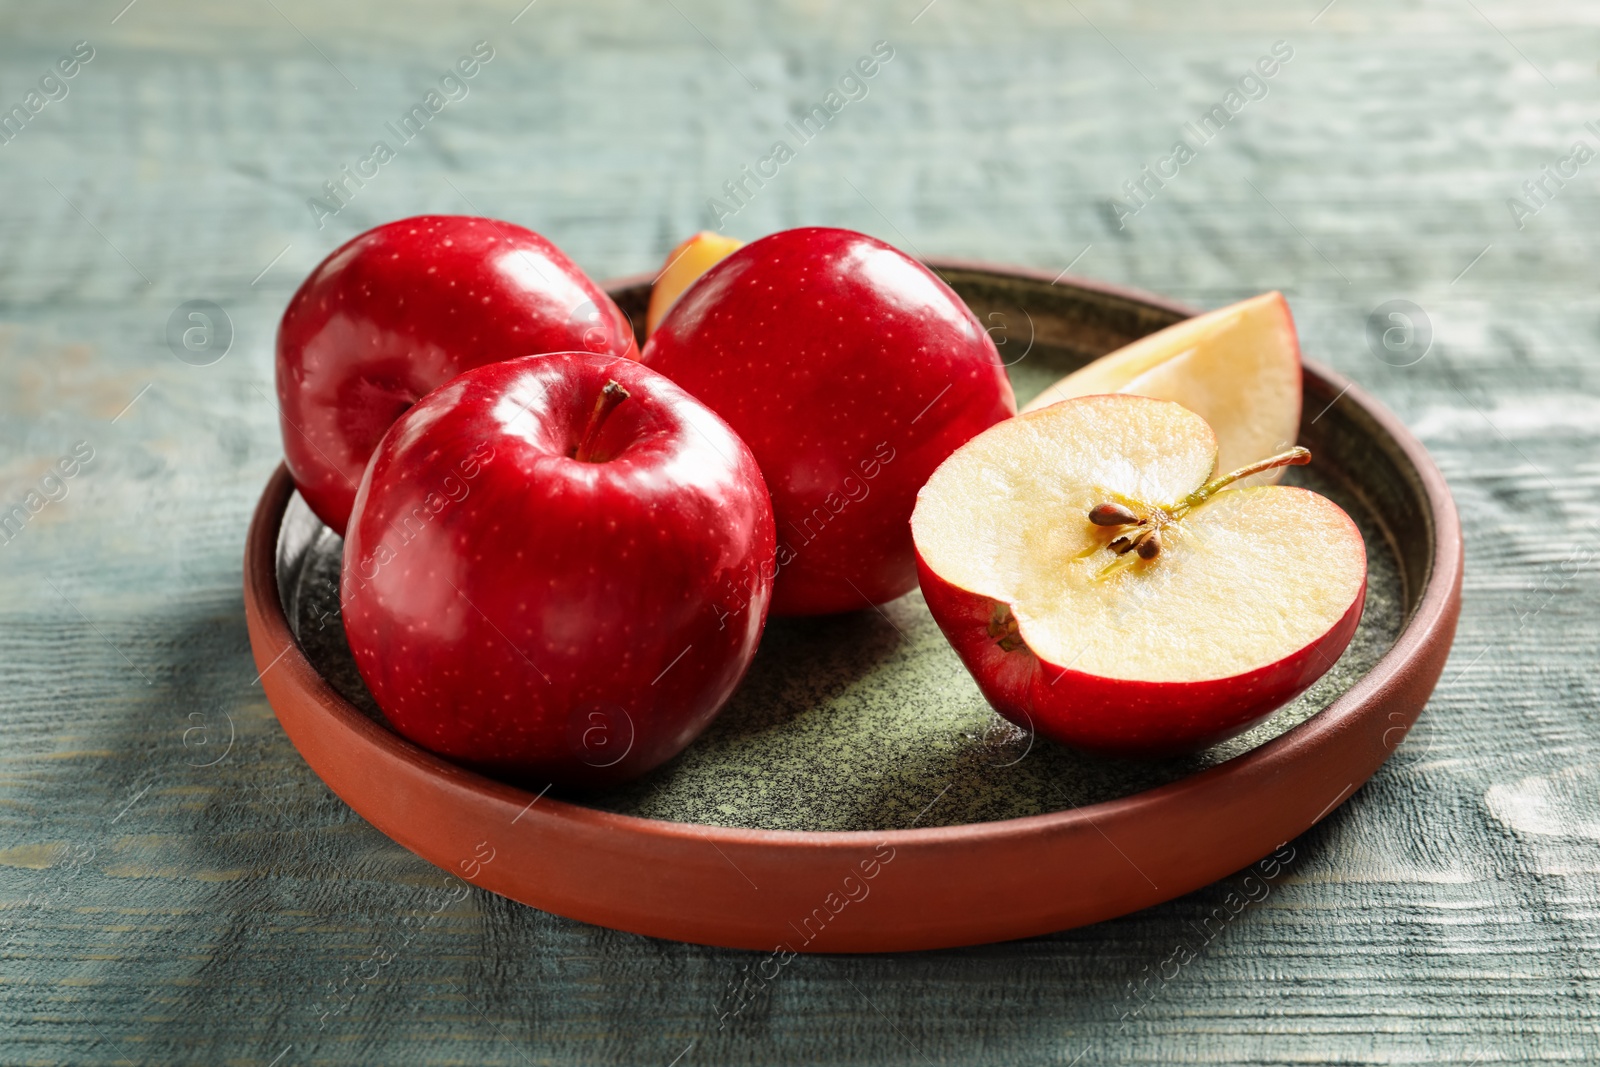 Photo of Plate with fresh ripe red apples on wooden background